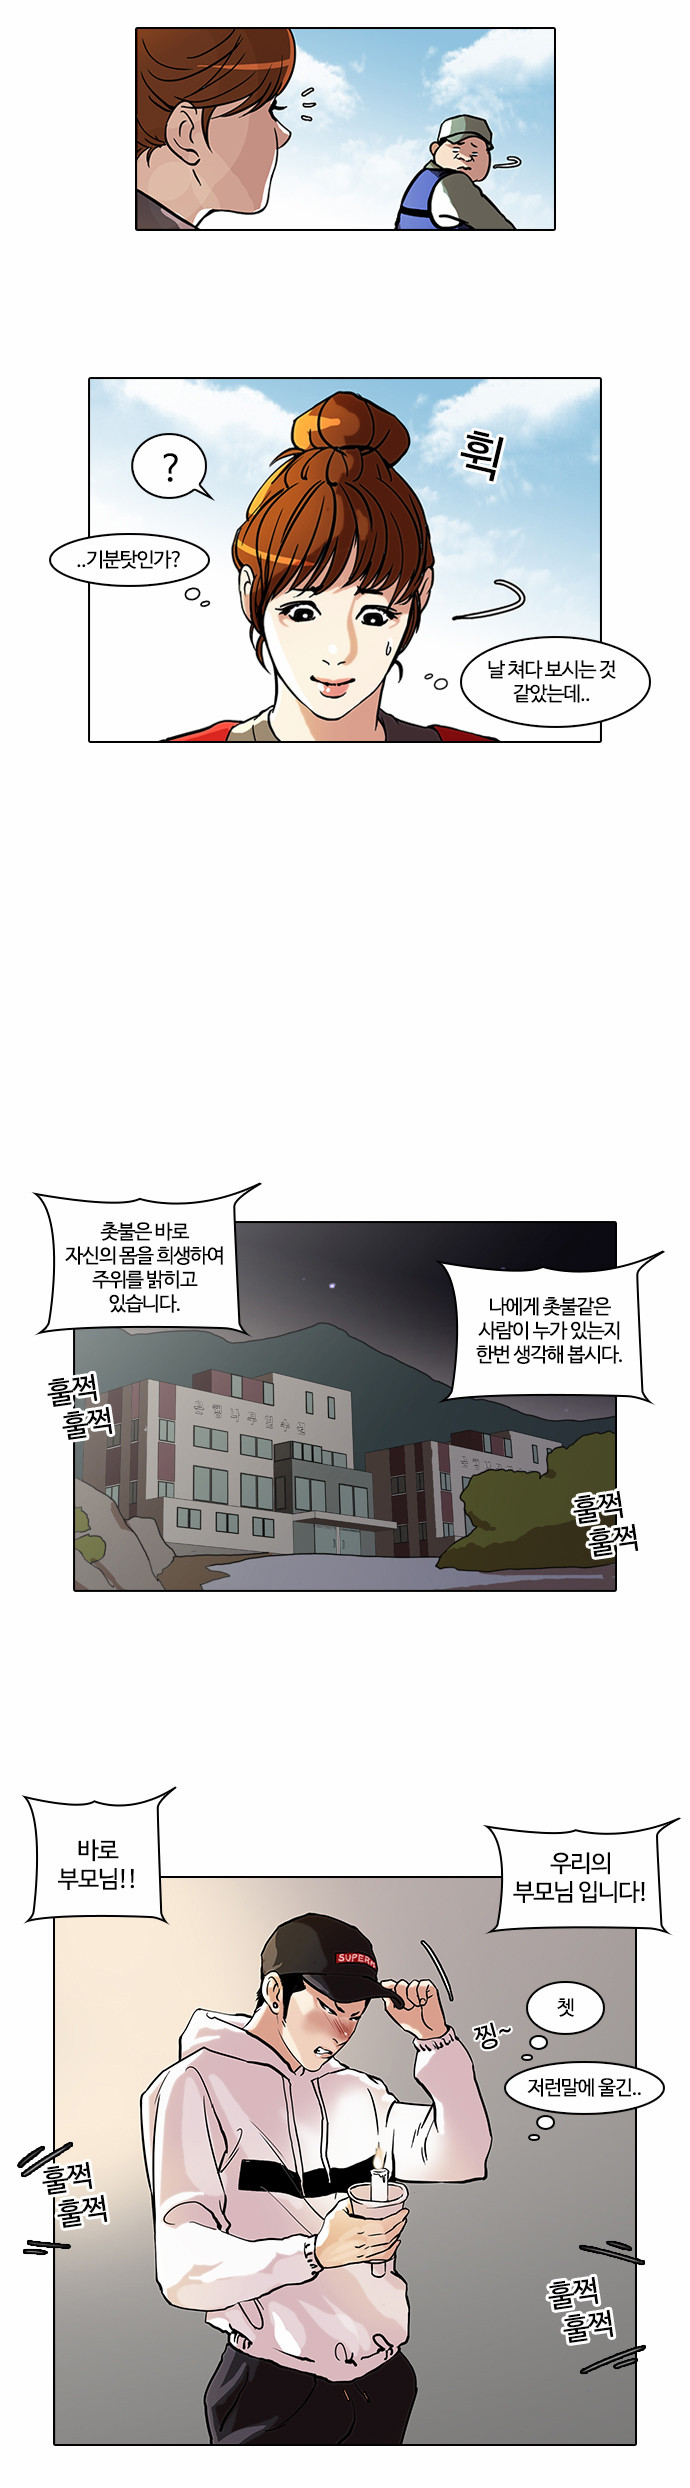 Lookism - Chapter 43 - Page 4